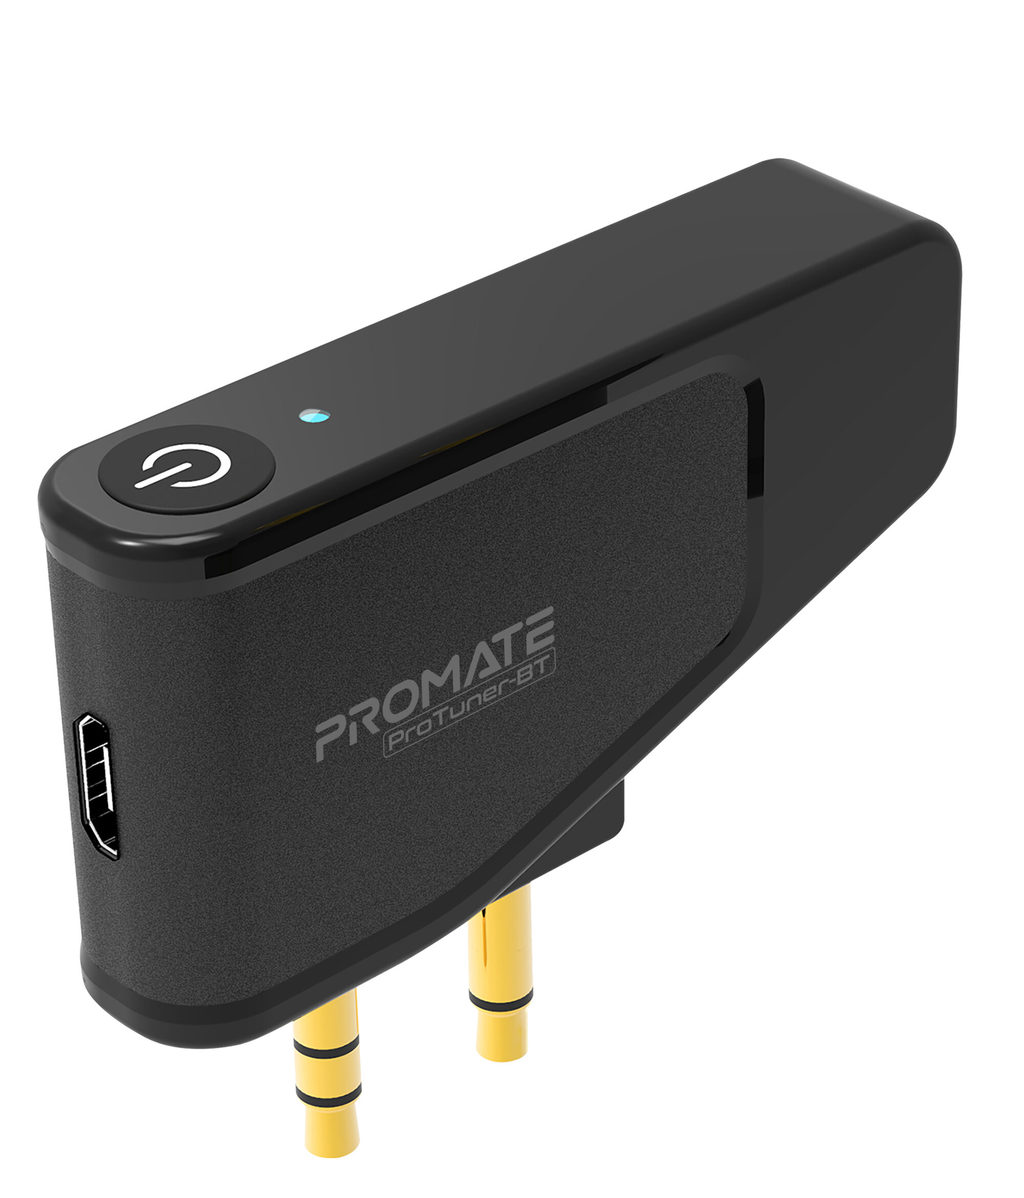 Promate Airplane Bluetooth Adapter, Multi-Functional Wireless Bluetooth 5.0 Audio Transmitter with 3.5mm Audio Jack, Latency Free and USB-C Charging for AirPods, Bose, Sony, TV, Emirates Airplane, ProTuner-BT